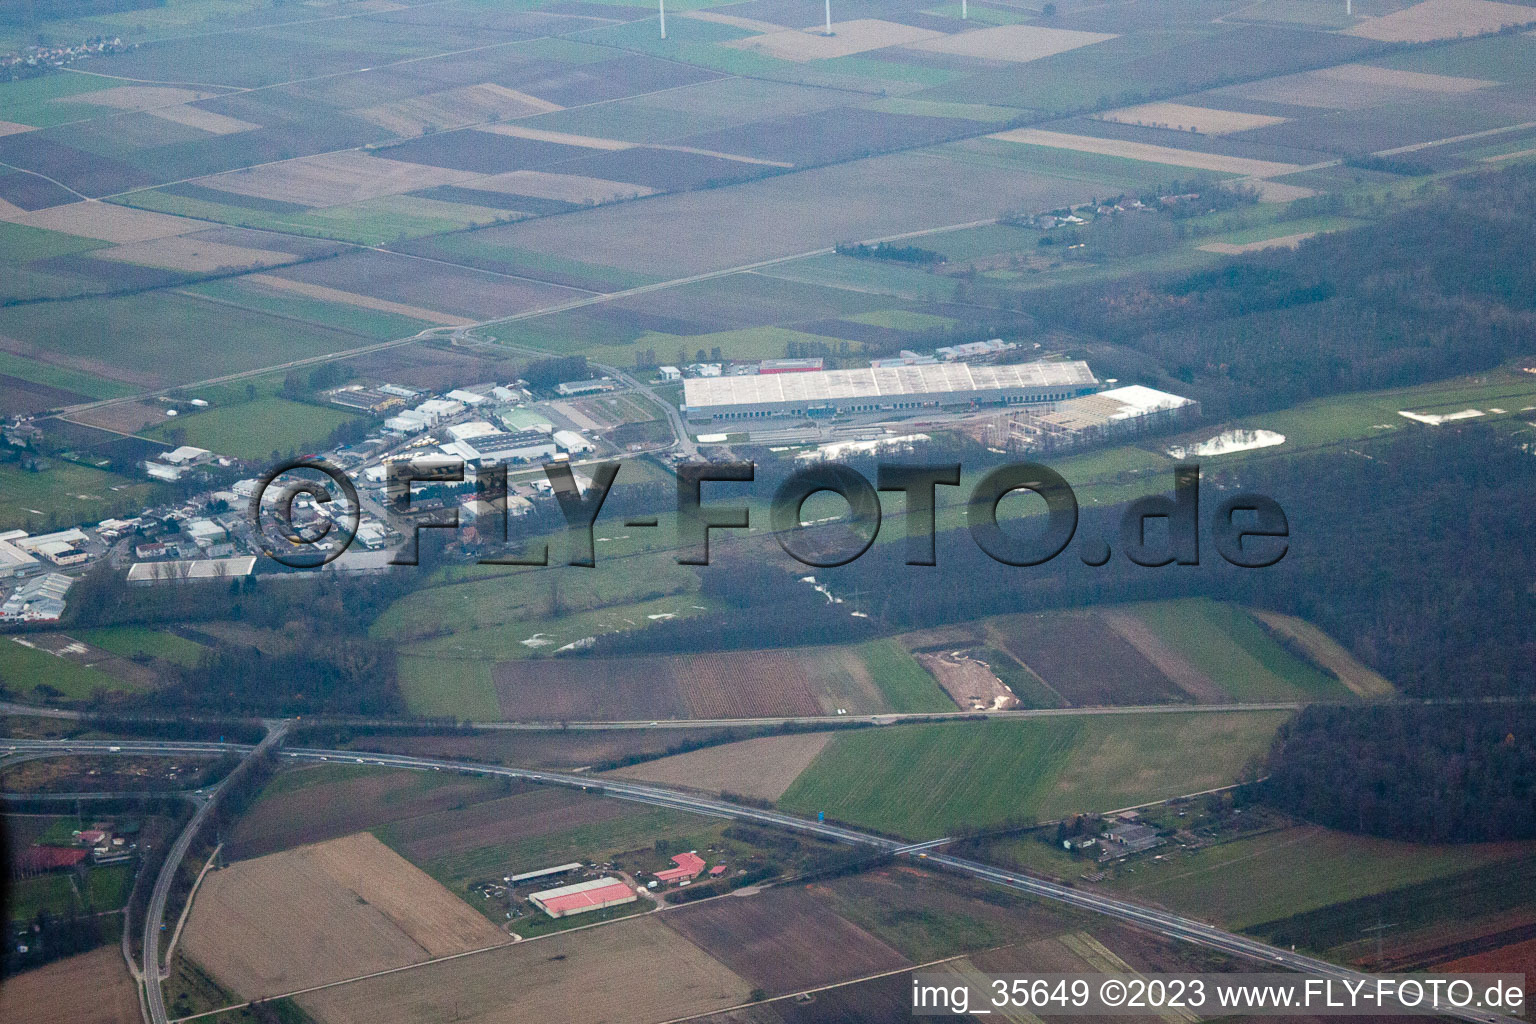 Horst industrial area in the district Minderslachen in Kandel in the state Rhineland-Palatinate, Germany from the drone perspective